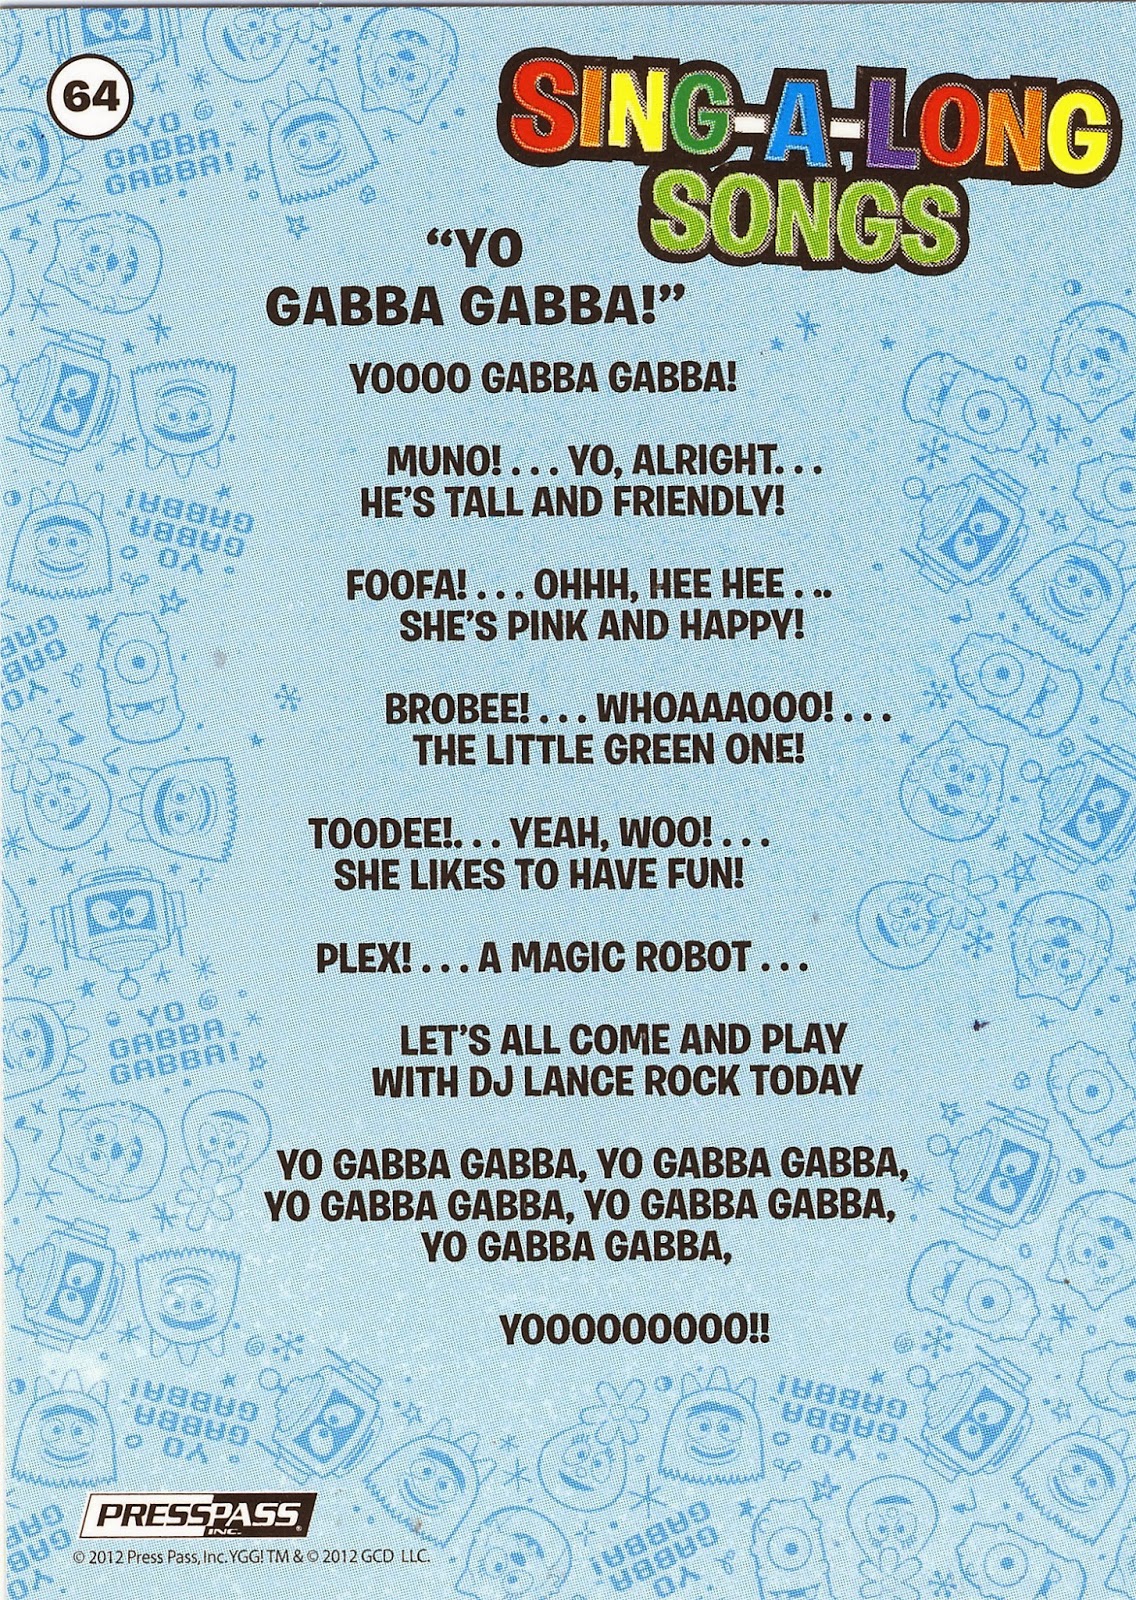 A Pack To Be Named Later: 2012 Press Pass Yo Gabba Gabba